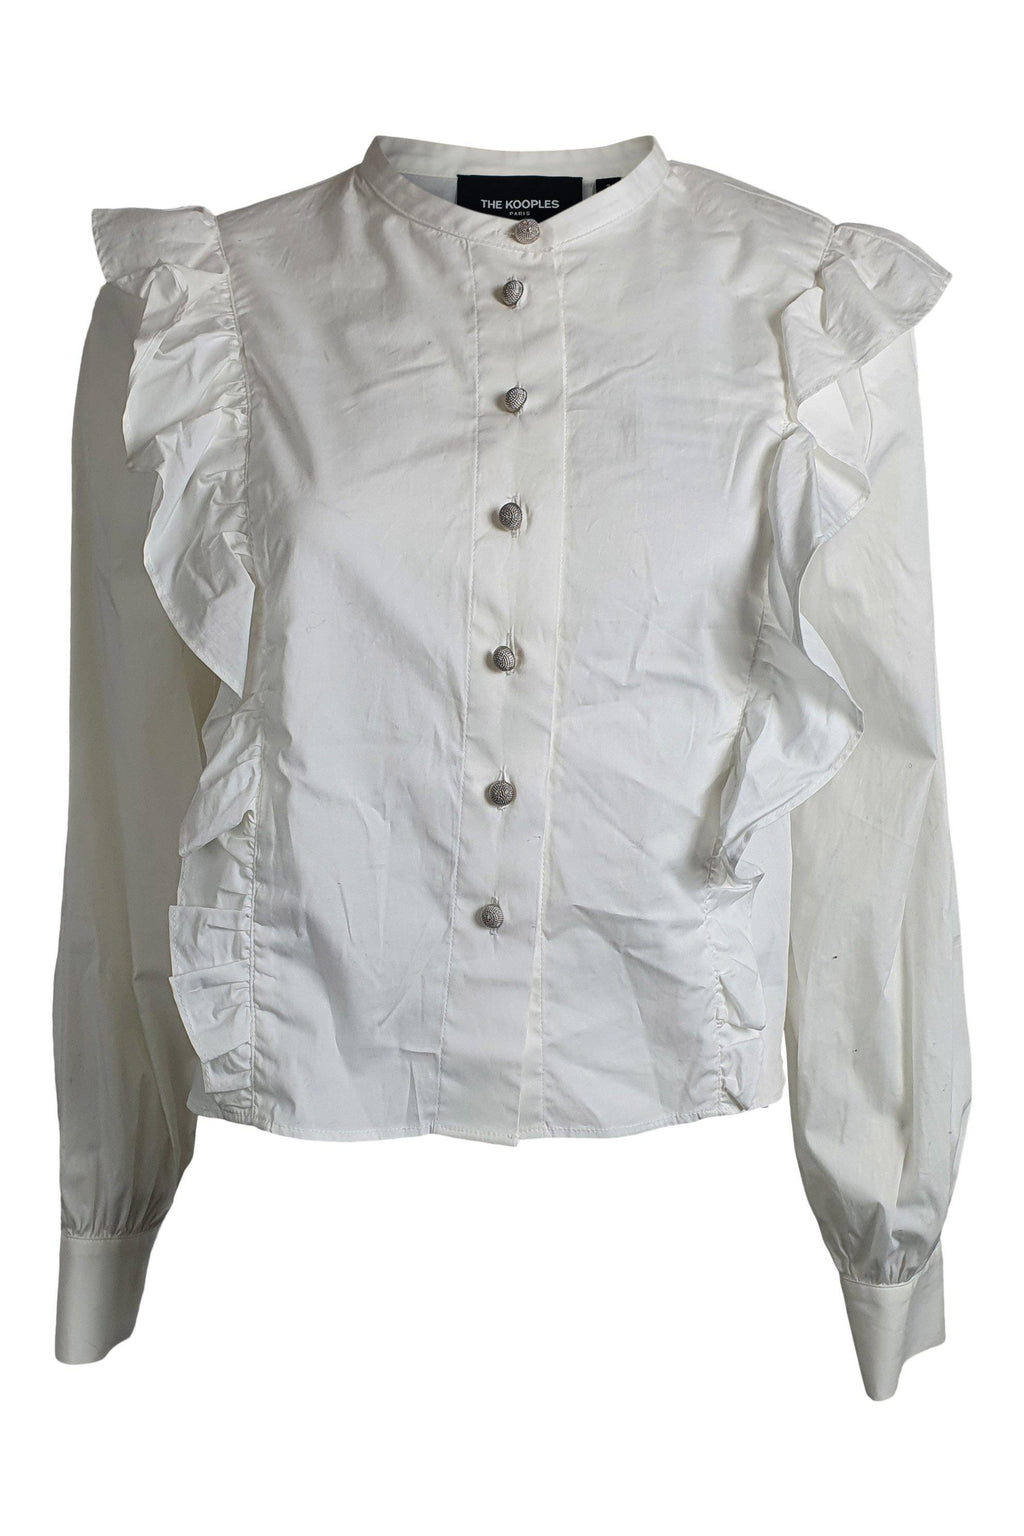 THE KOOPLES White Basic Cotton Frill Front Cropped Shirt (2 | EU 38 | UK 12 | IT 44)-The Freperie